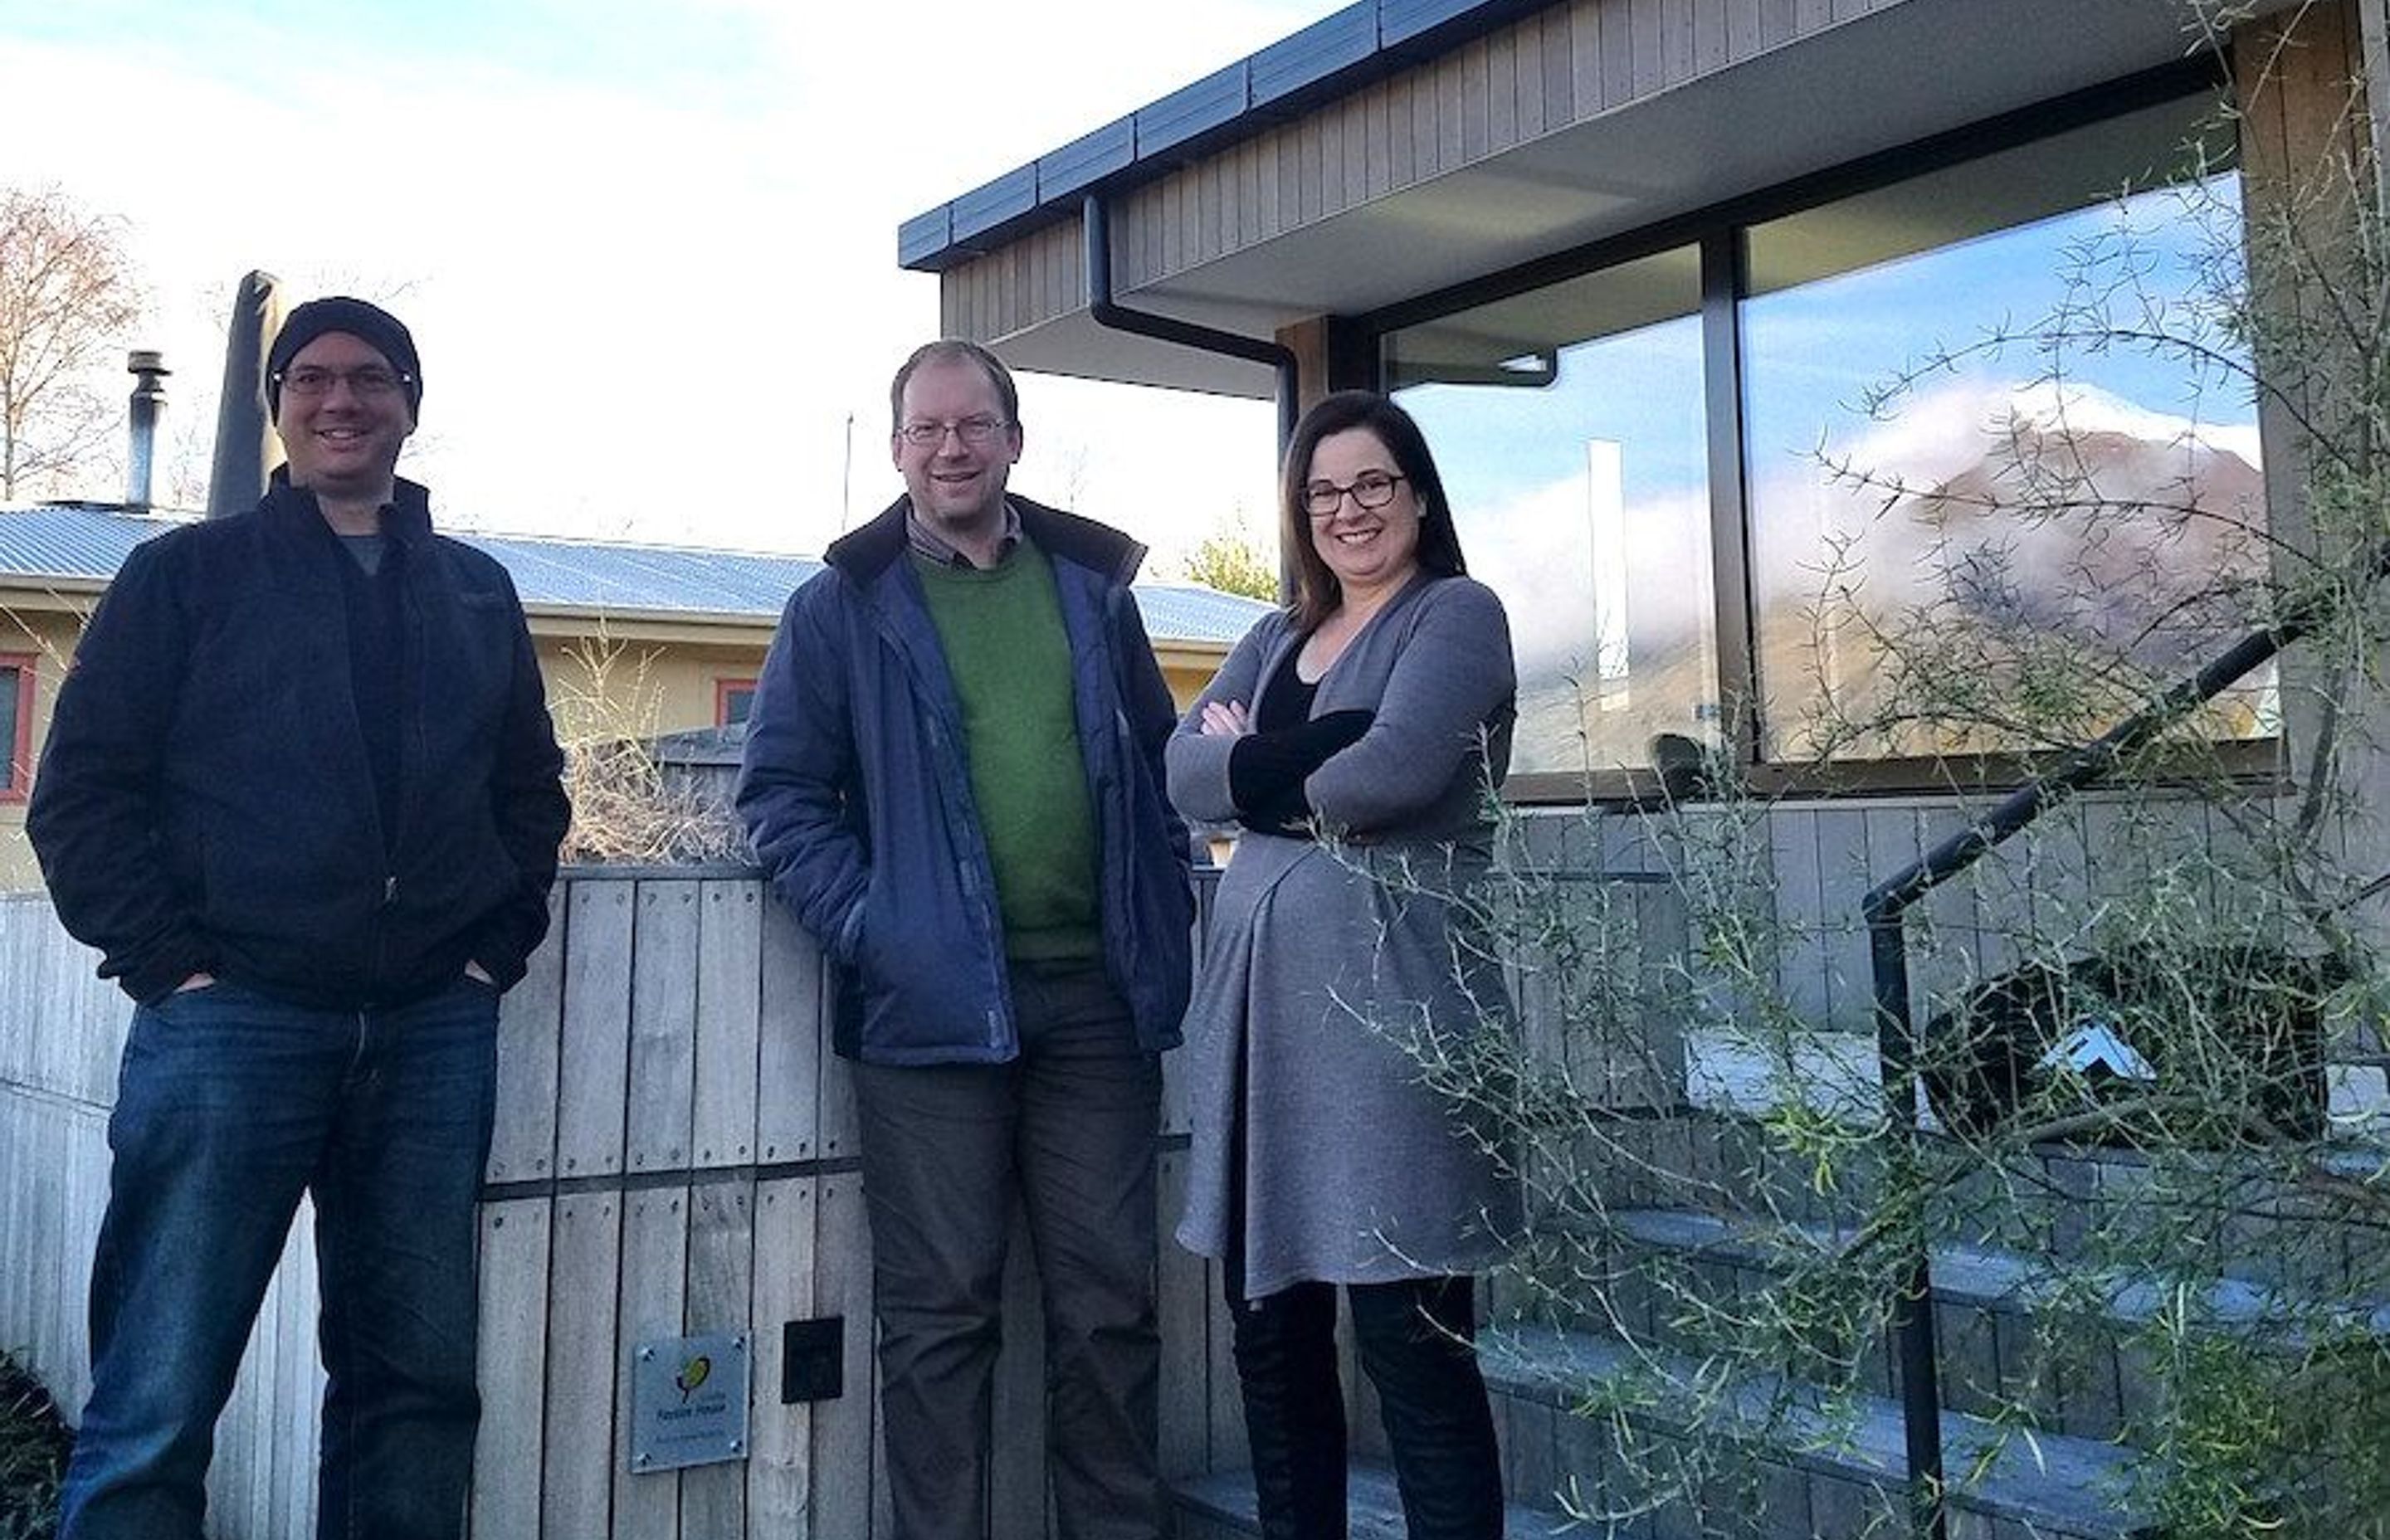 Jason Quinn (far left) in front of certified Passive House in Wanaka (Credit: Sustainable Engineering)

